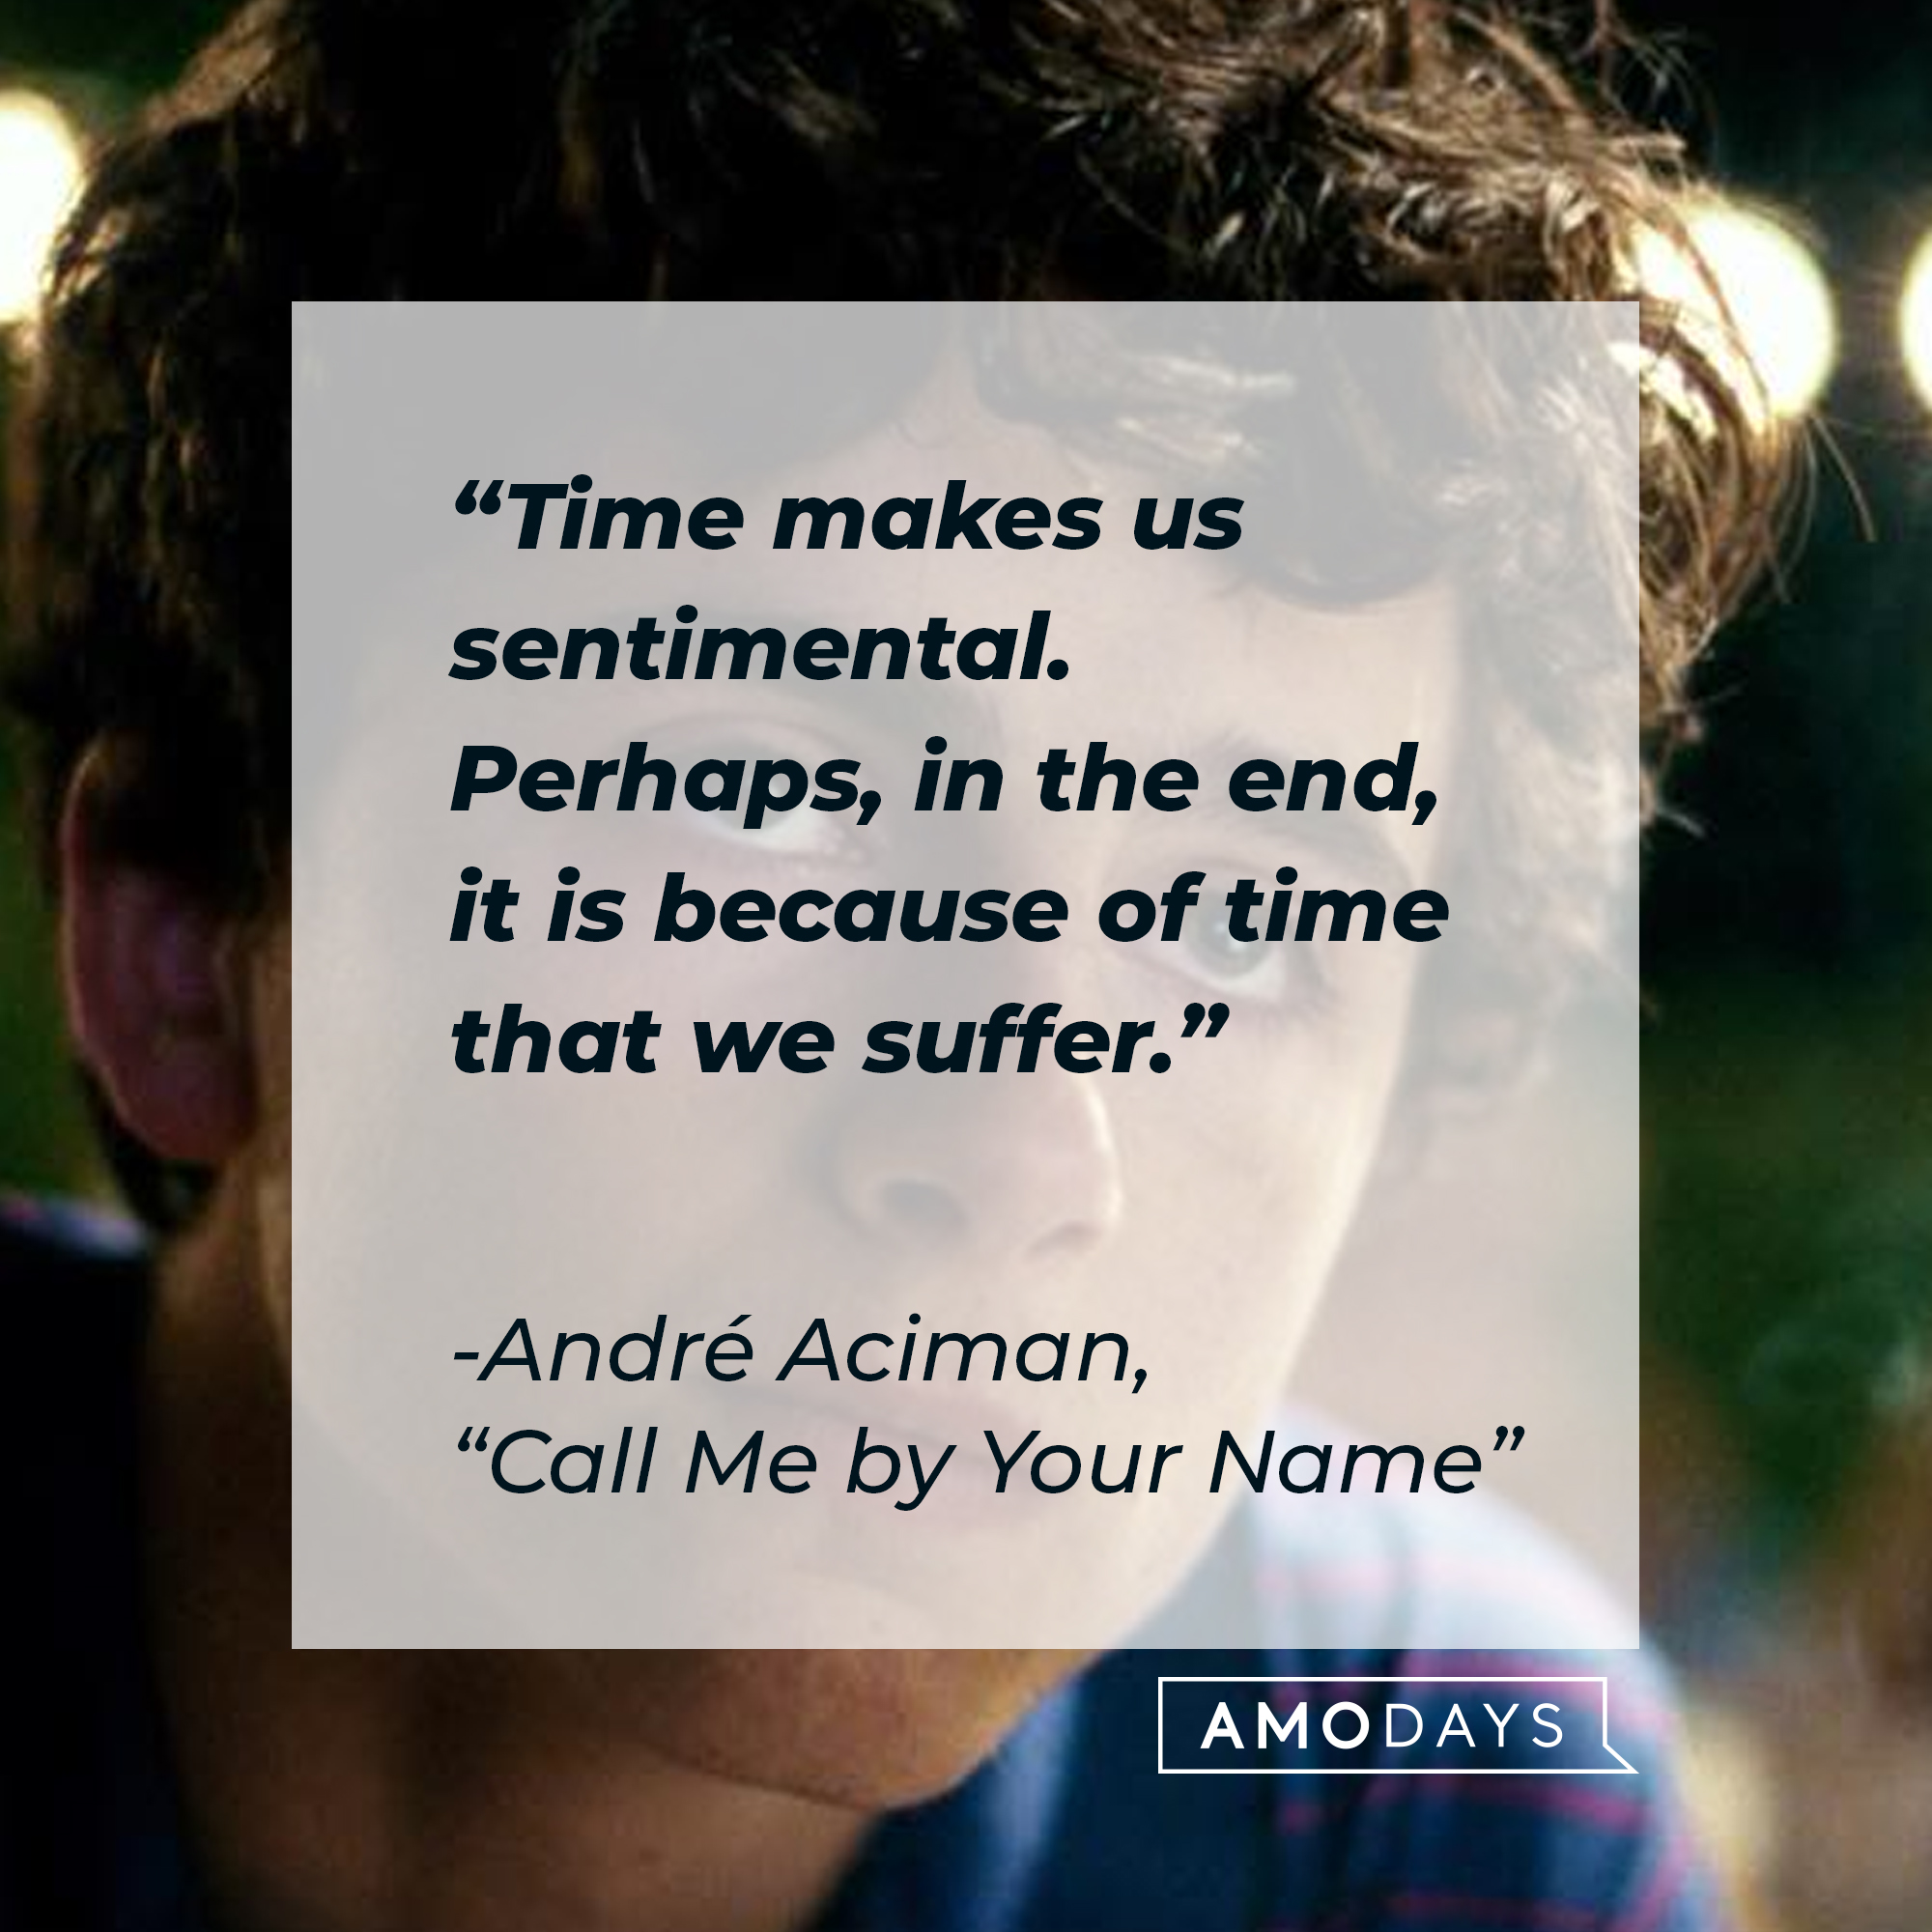 The character Elio from the film “Call Me By Your Name,” with a quote by the author, André Aciman, from the book it’s based on: “Time makes us sentimental. Perhaps, in the end, it is because of time that we suffer.” | Source: Facebook.com/CallMeByYourNameFilm